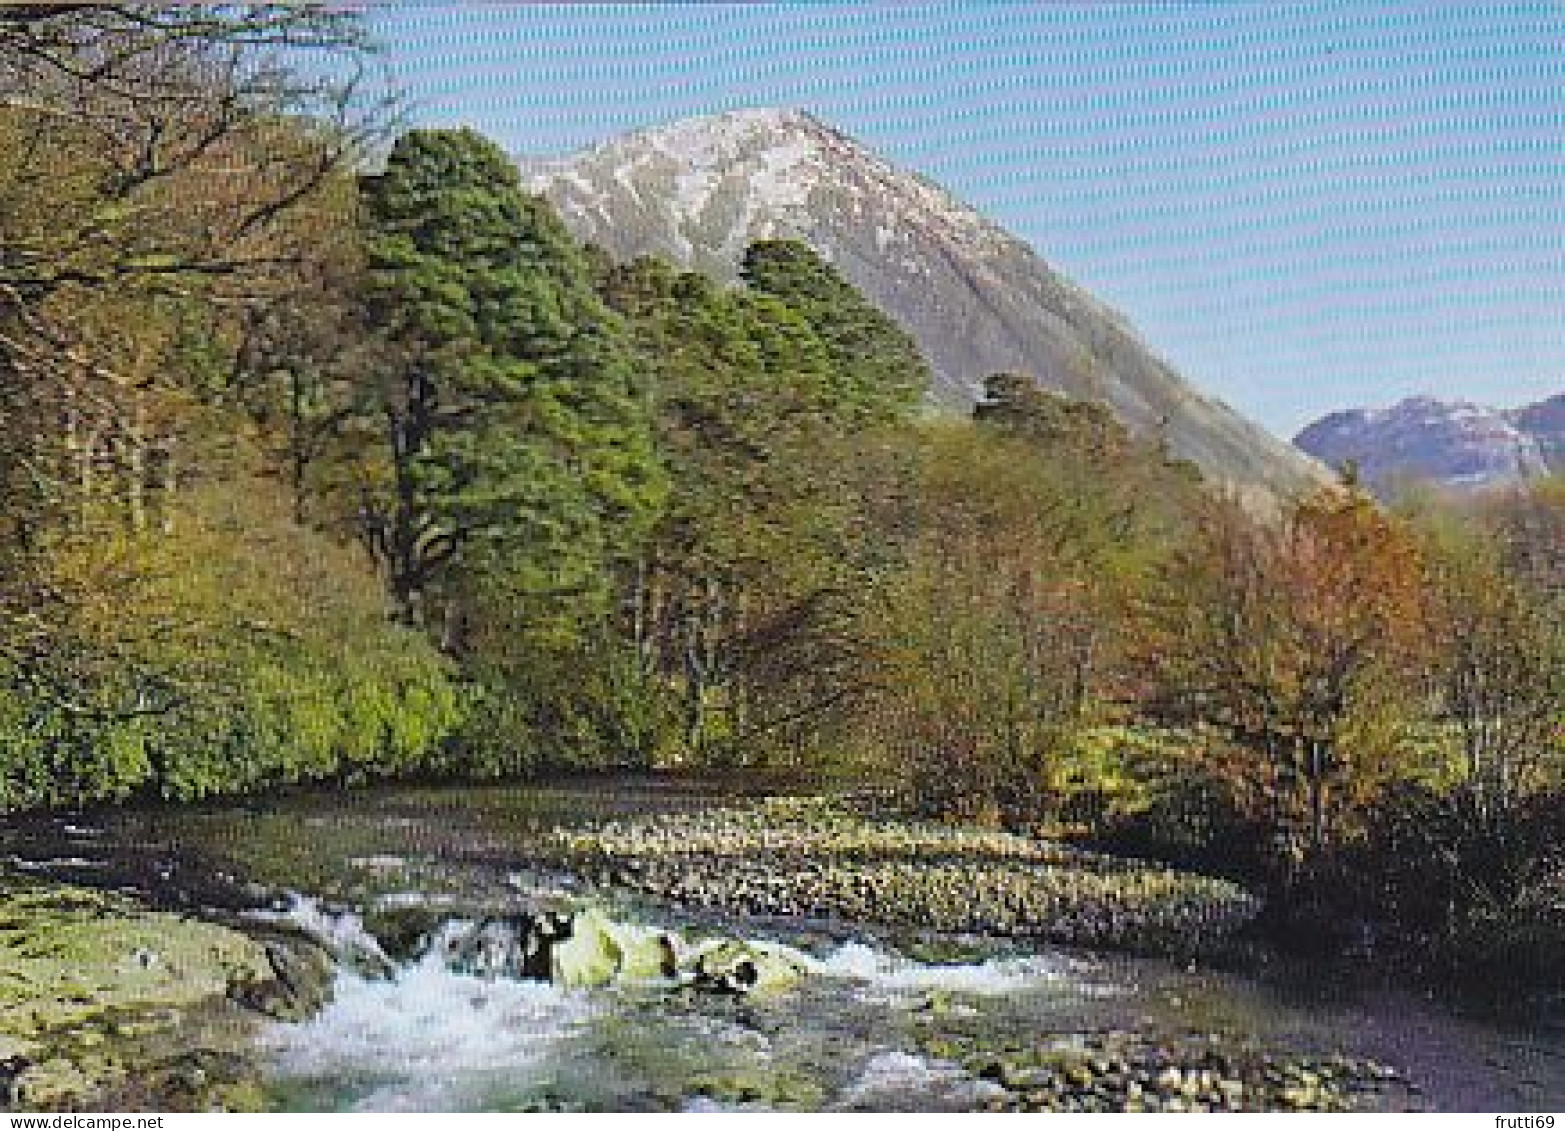 AK 173550 SCOTLAND - The River Coe At Its Lower Reaches - Argyllshire